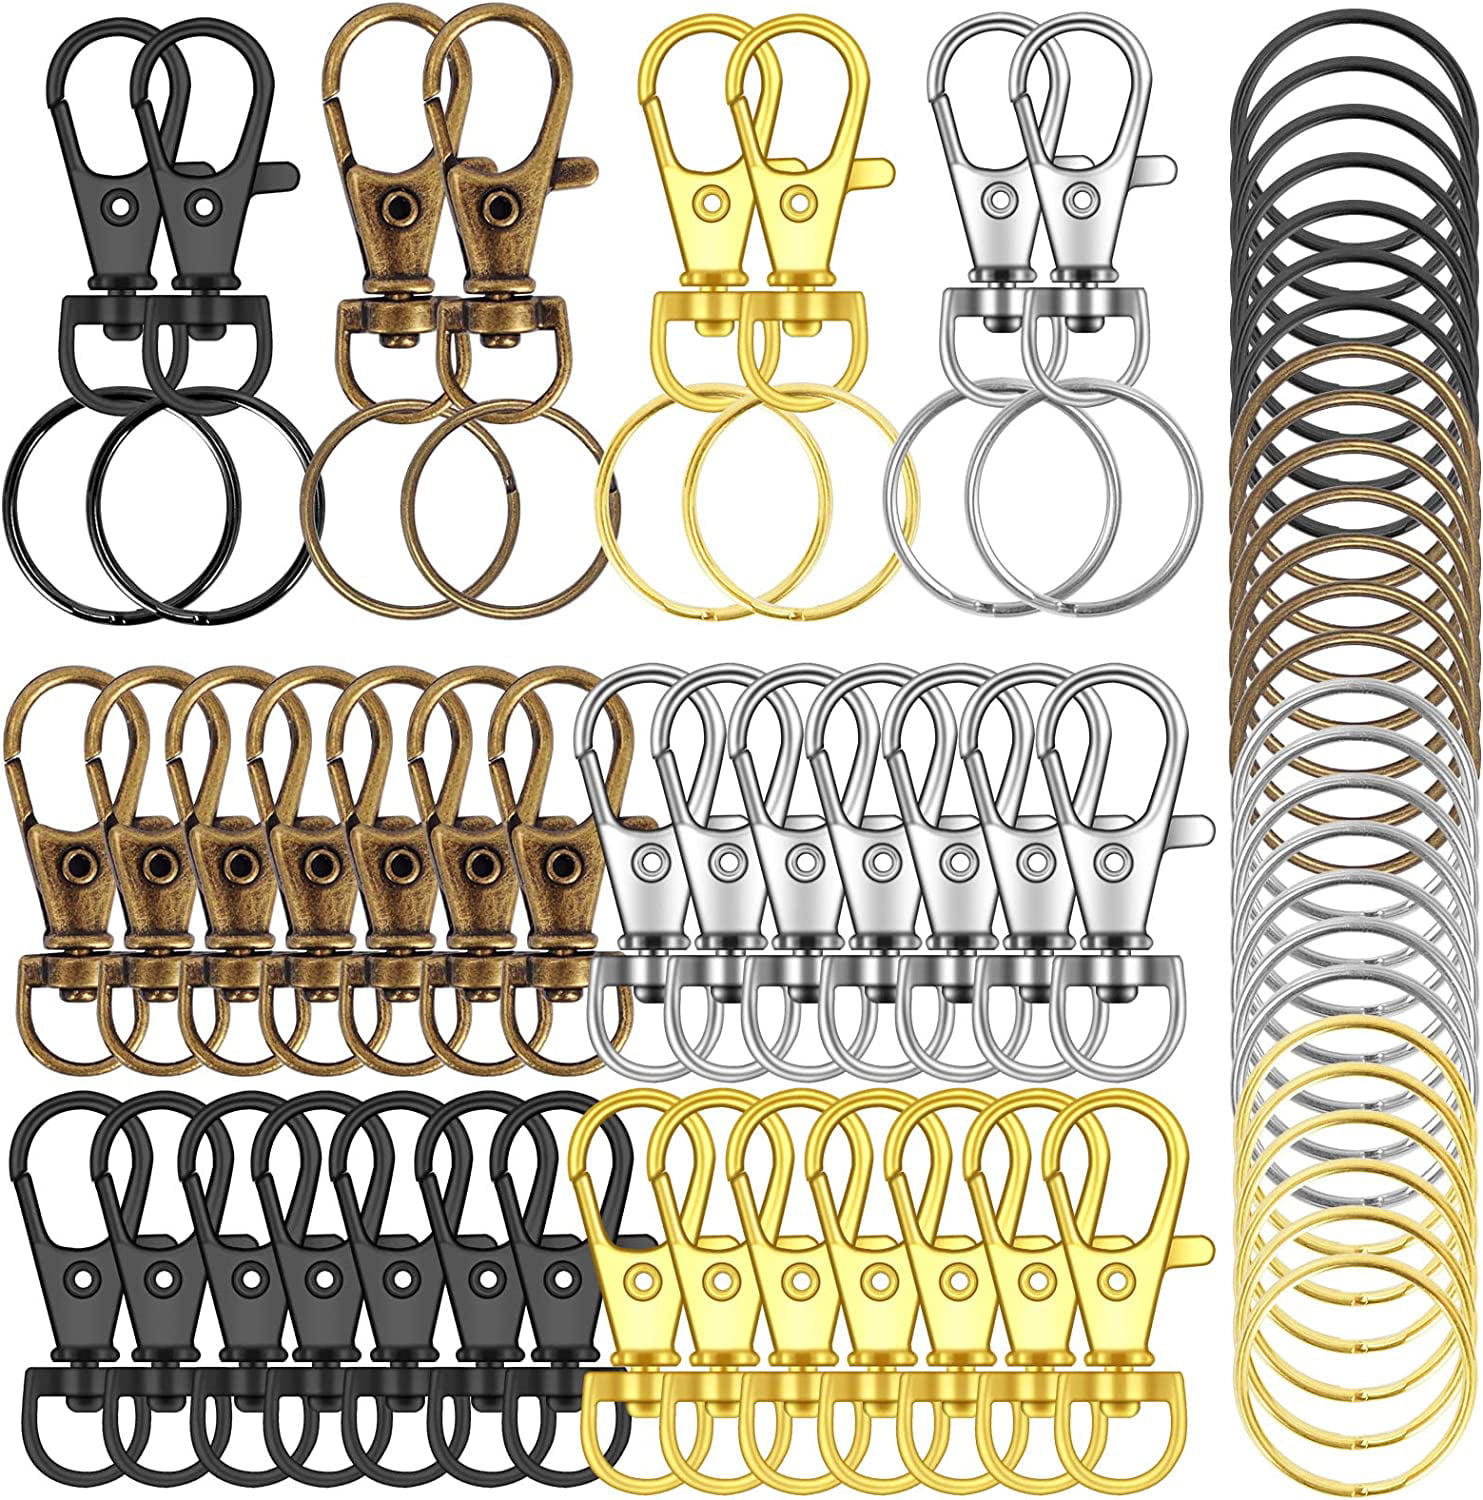 50 Pack Metal Swivel Clasps Lobster Claw Clasp Lanyard Snap Hook 1 5/8 x 1 (Wide 3/4 D Ring) with 50 Key Rings - Jewelry Findings or Sewing Projects